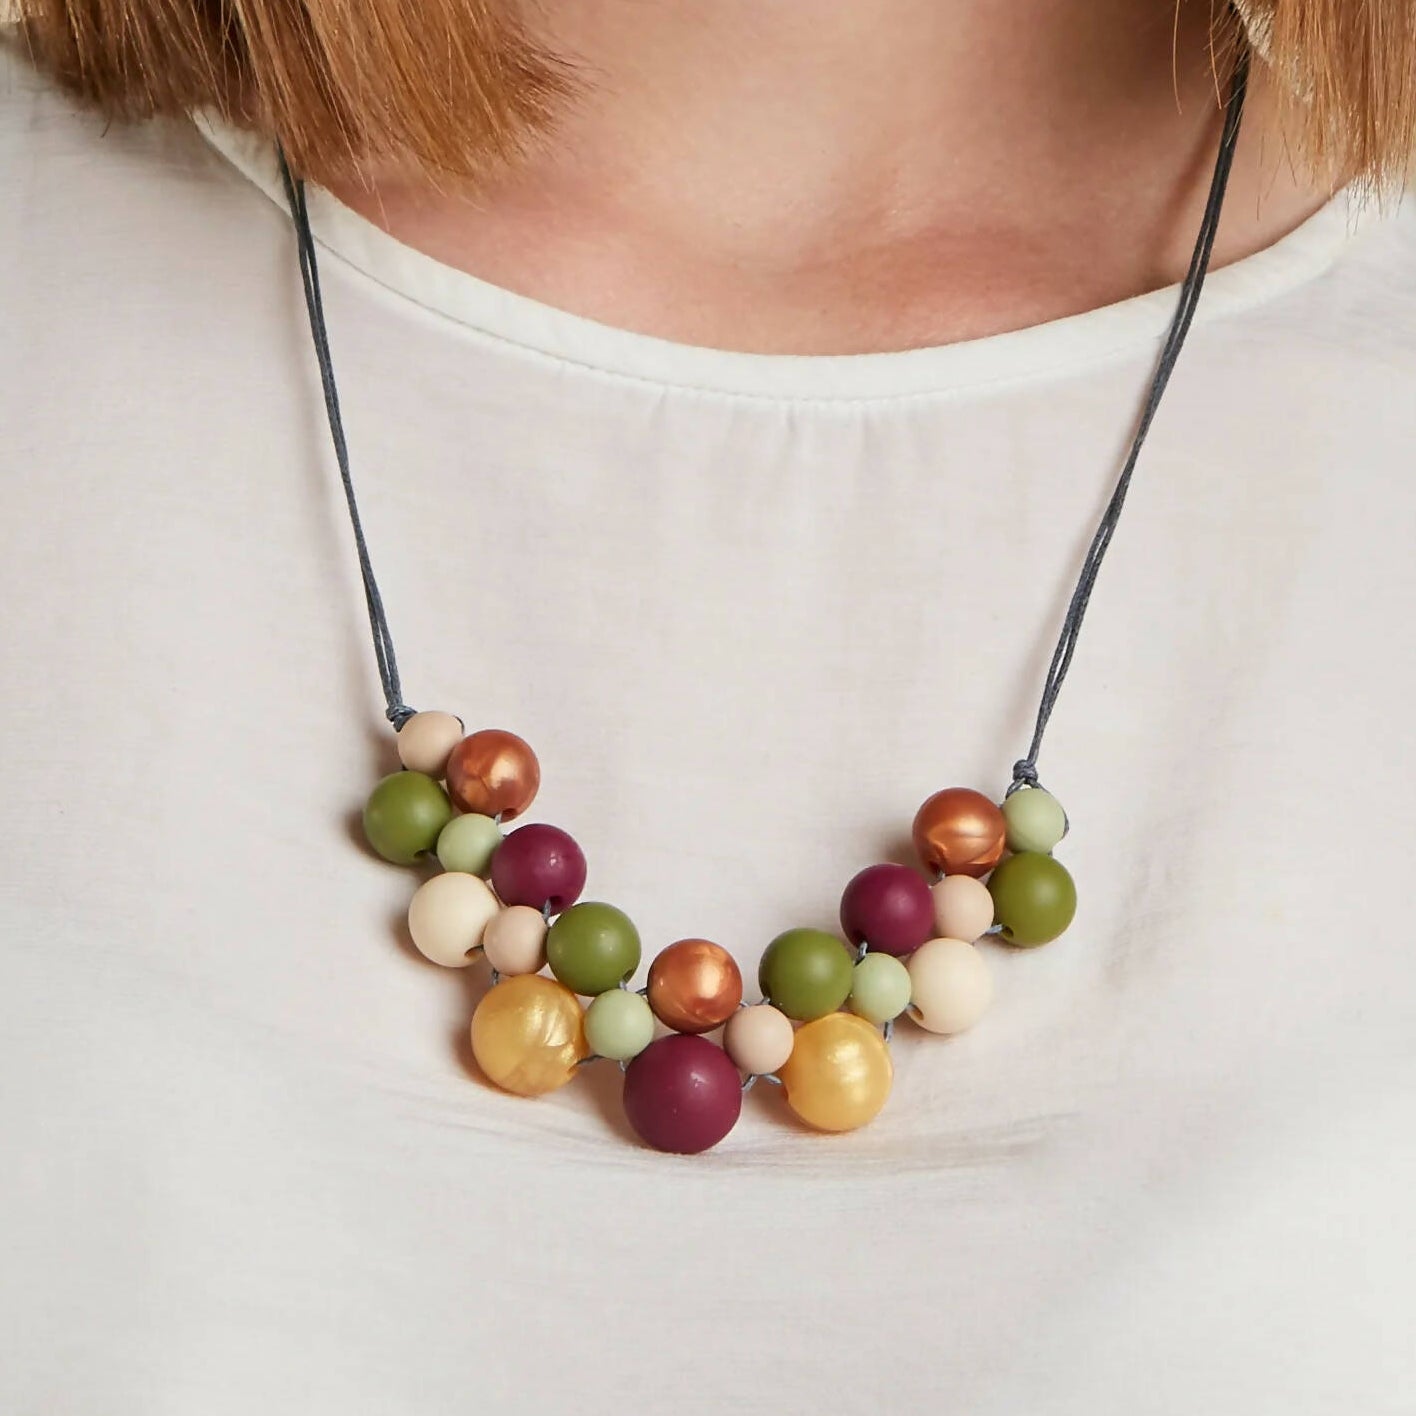 Silicone Necklace - Mustard Burgundy Lint | Geometric Necklace